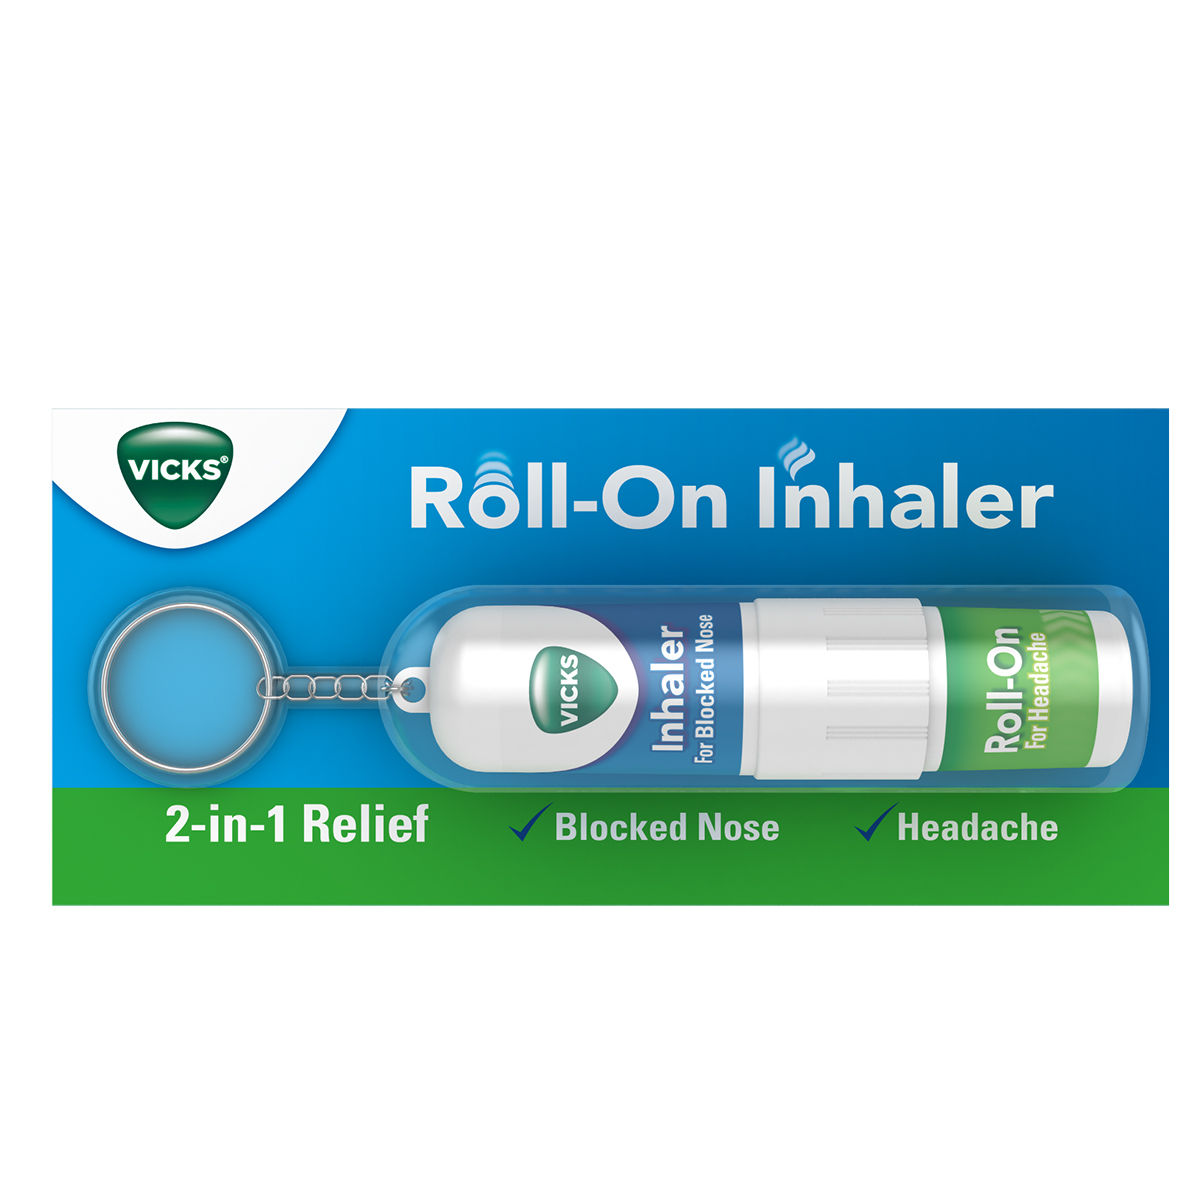 Vicks Roll-On Inhaler 2-In-1 Relief, 1.5 ml Price, Uses, Side